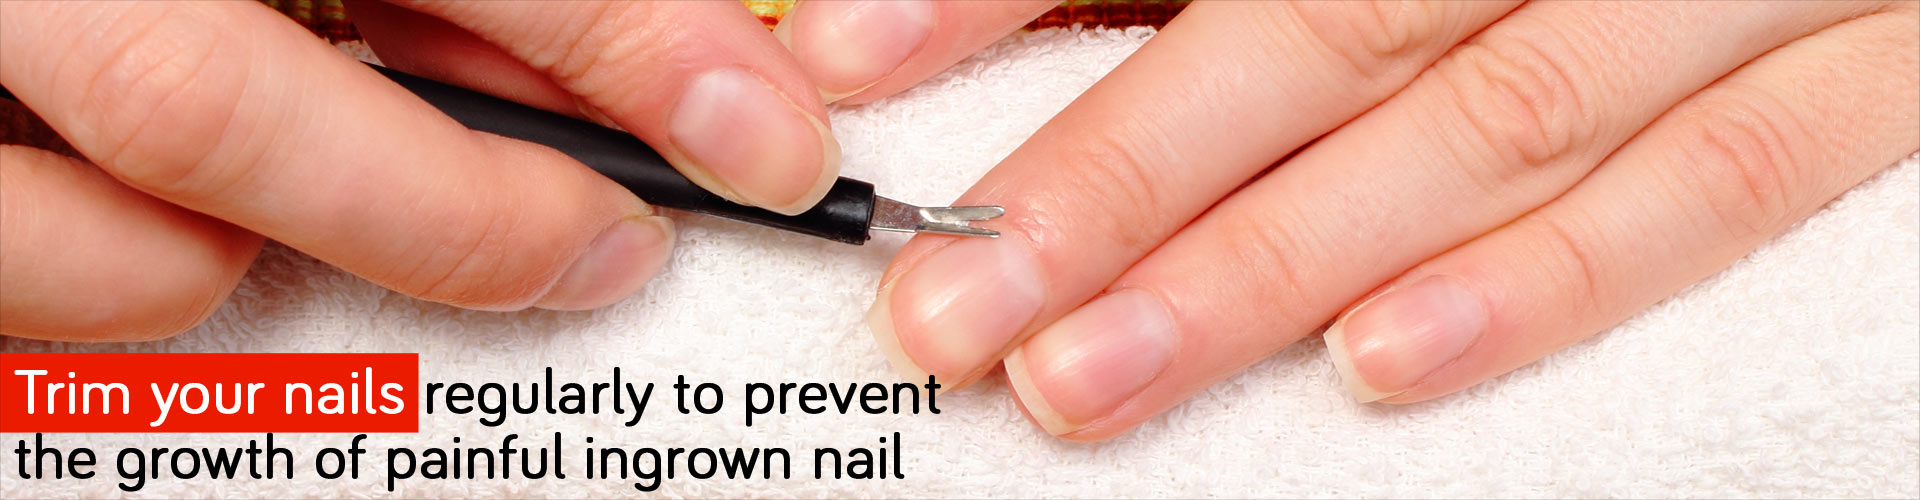 Trim your nails regularly to prevent the growth of painful ingrown nail